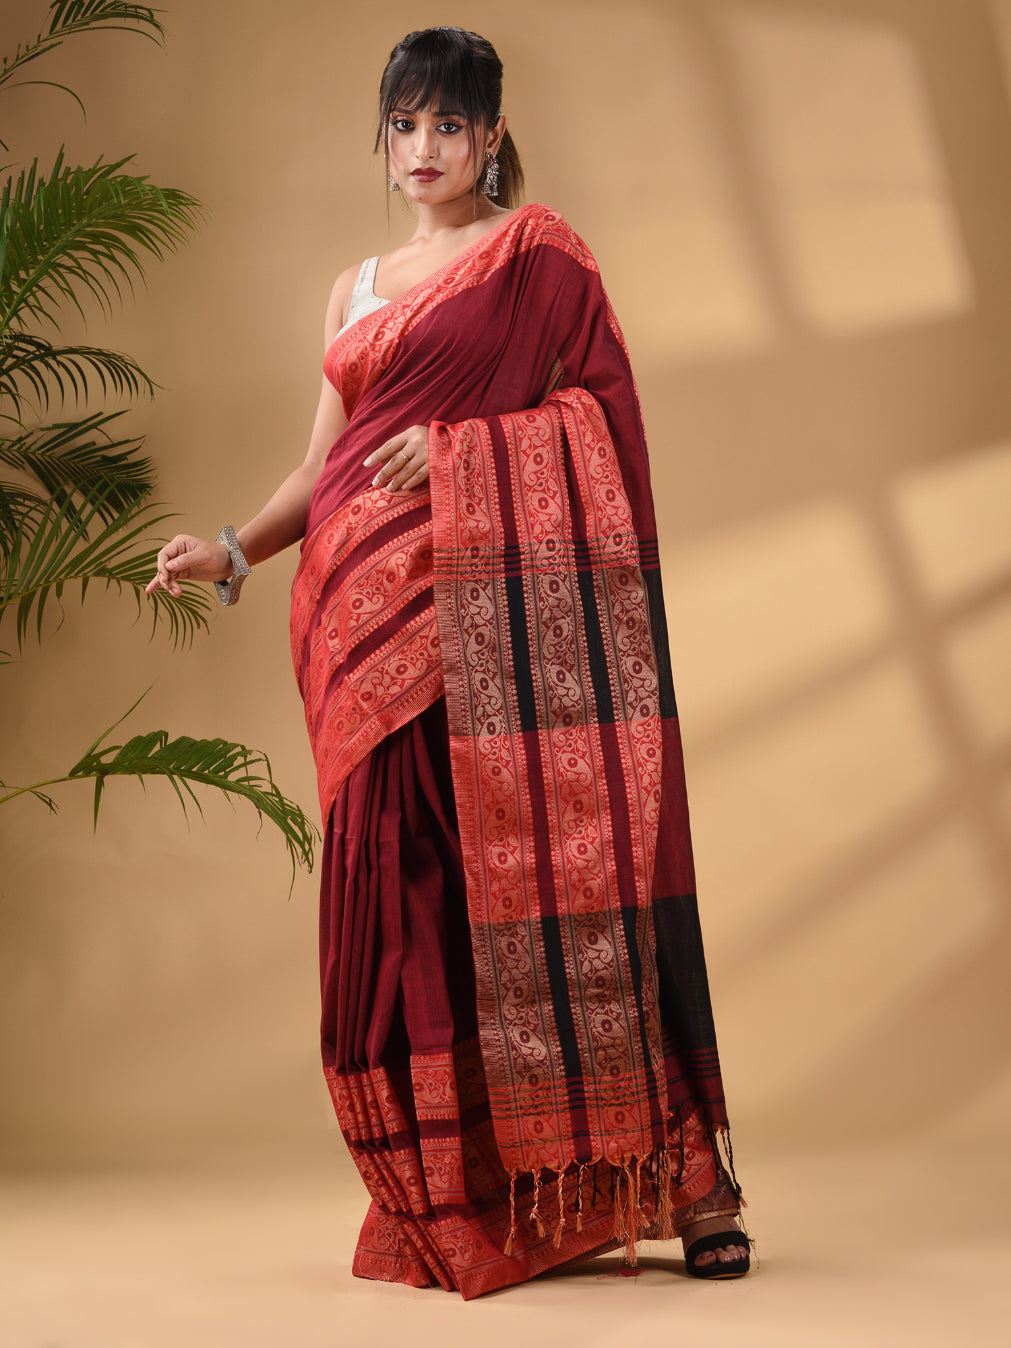 Dark Red Cotton Handwoven Soft Saree With Paisley Border